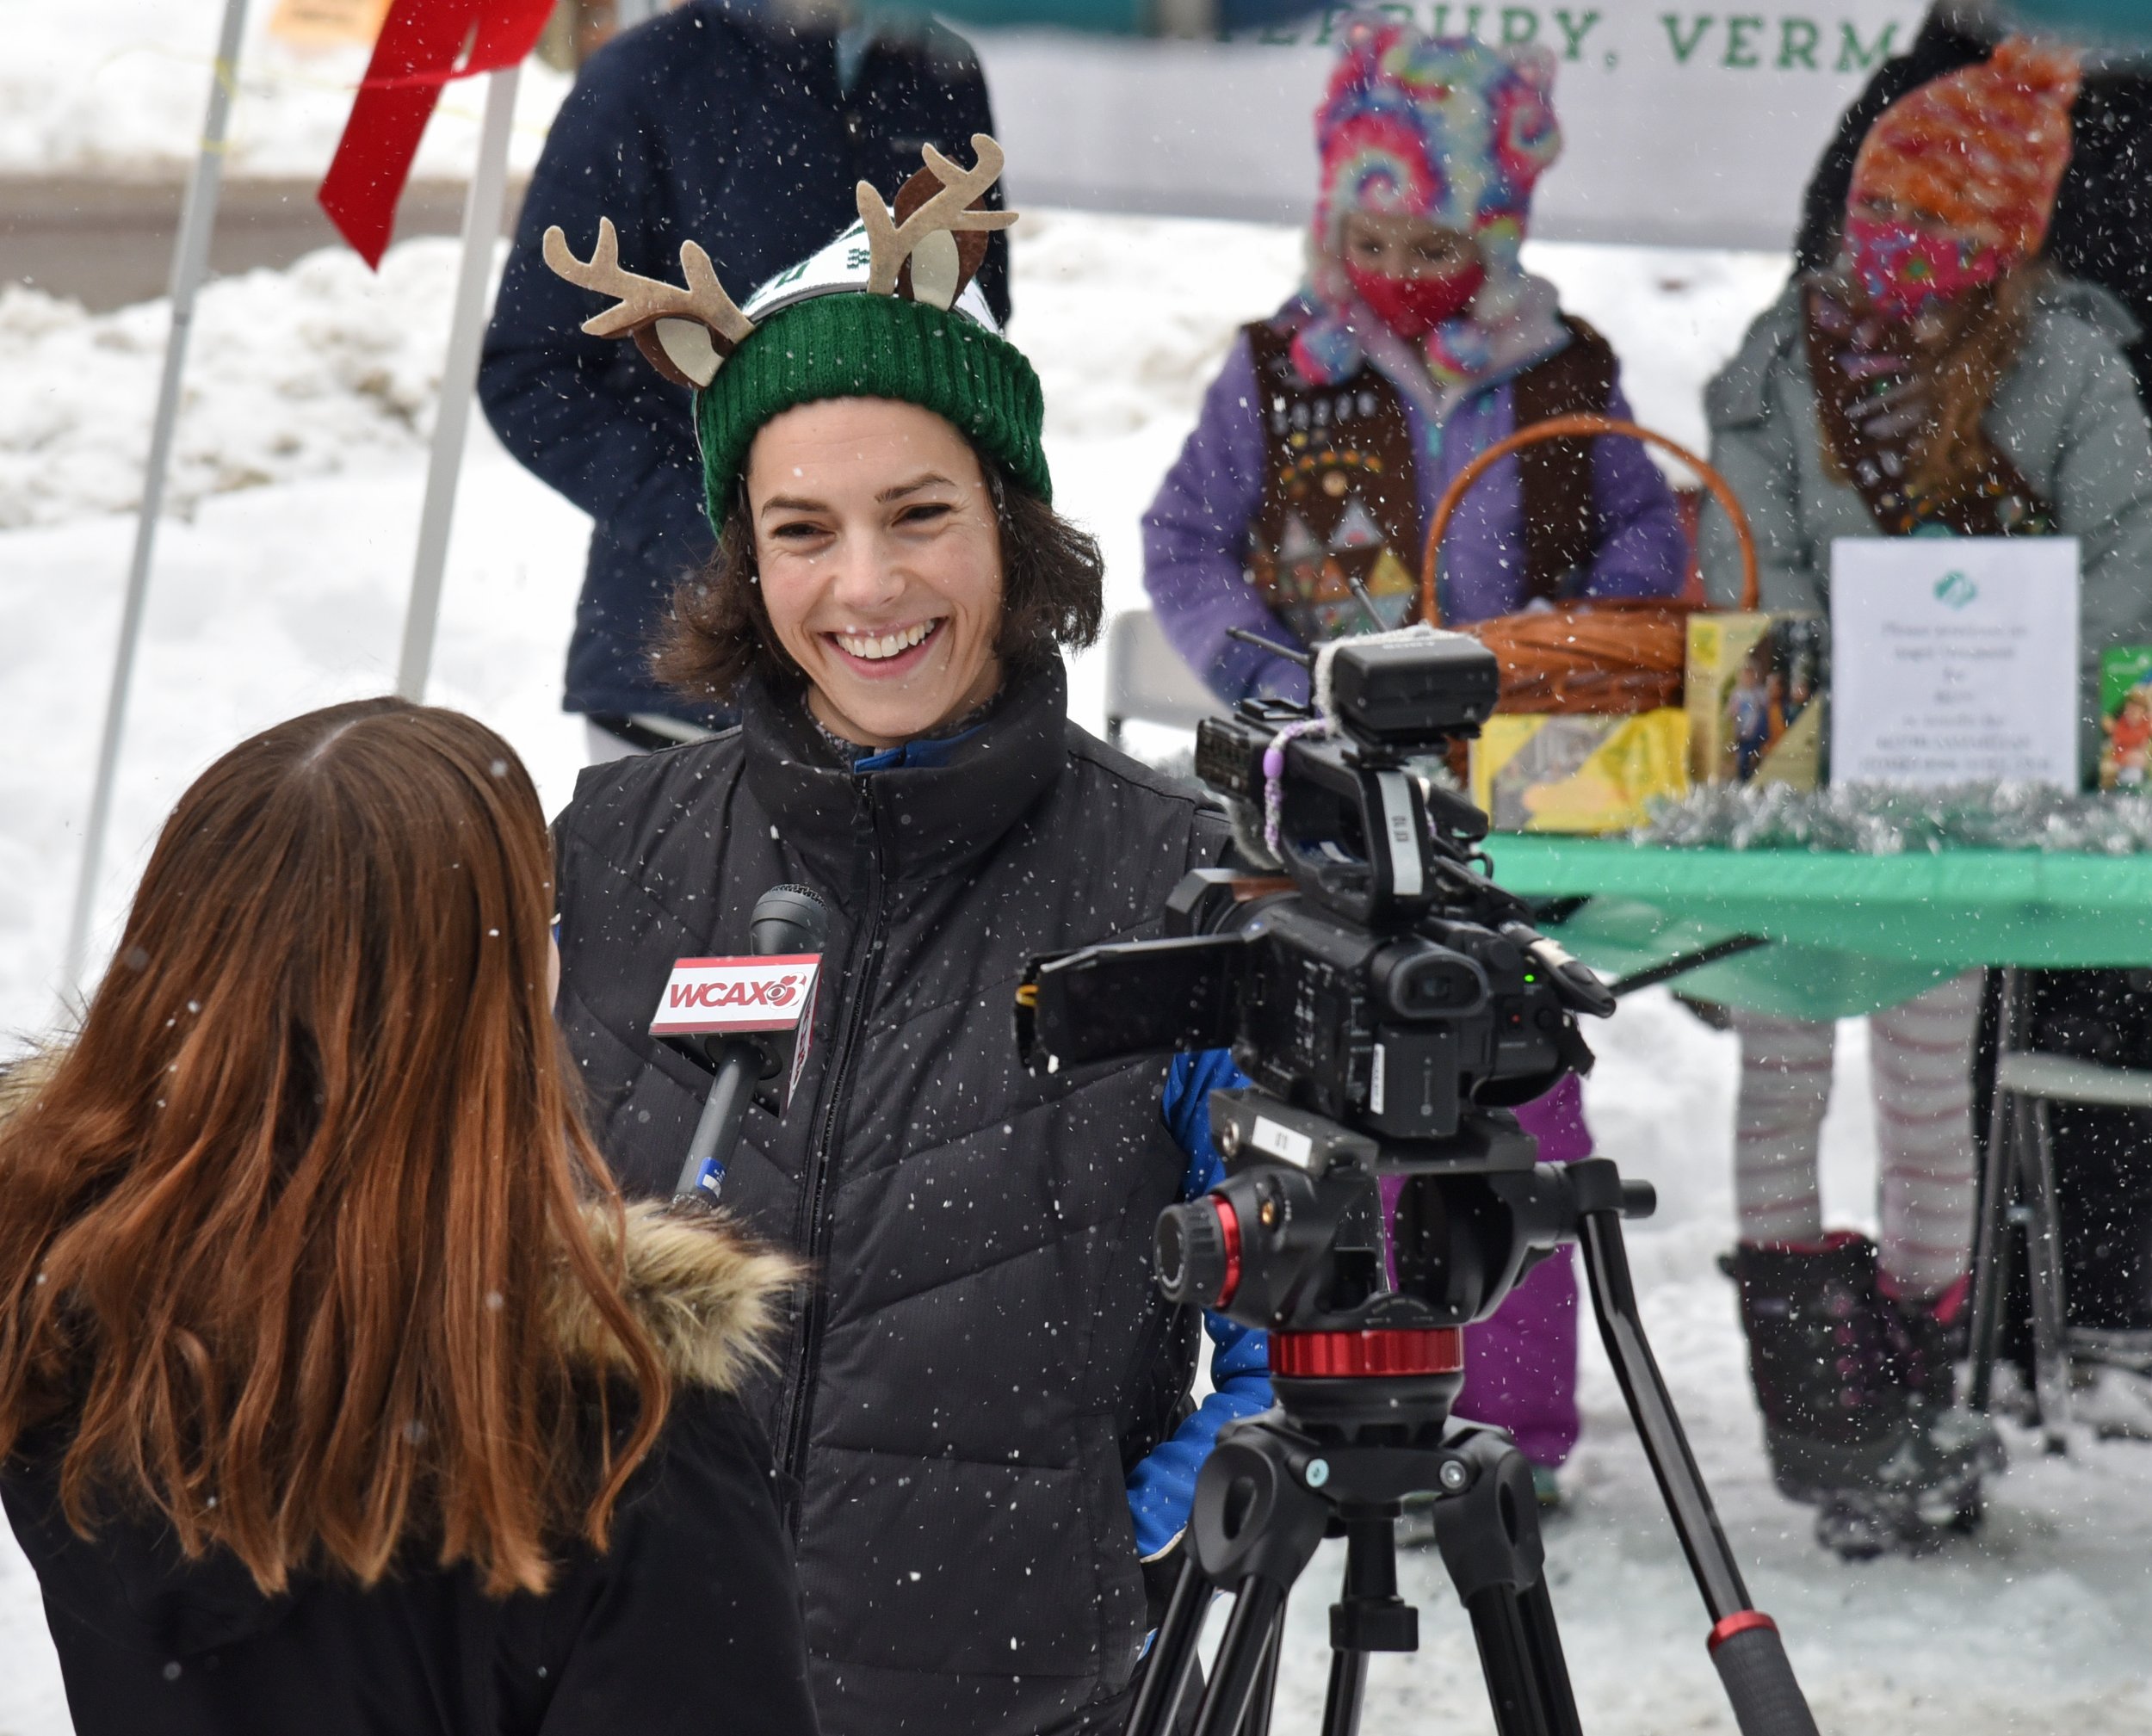  D’Angelo is interviewed by WCAX TV Channel 3 at the “Reindeer Rendevous” event. Photo by Gordon Miller 